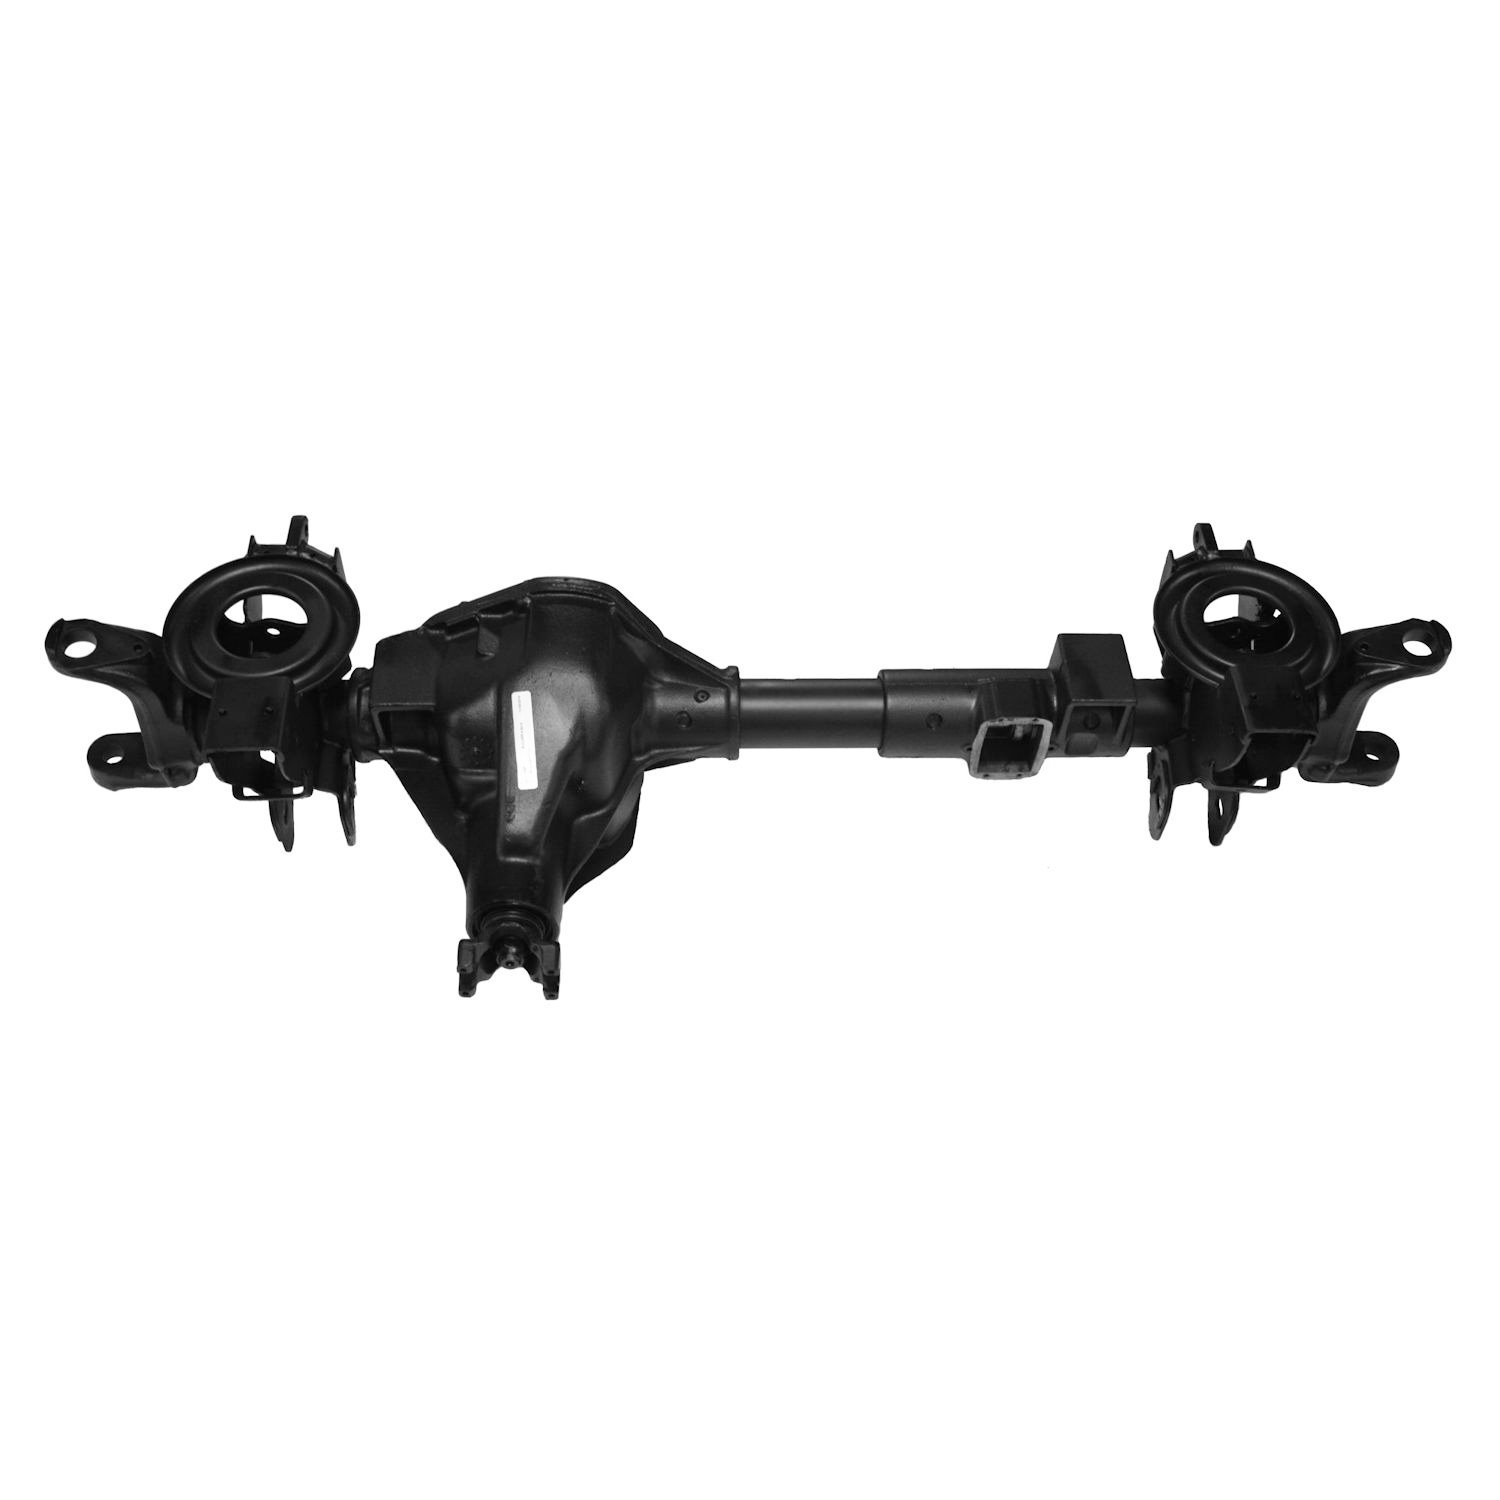 Remanufactured Complete Axle Assy for Dana 60 1998 Ram 2500 & 3500 4.11 with Rear ABS